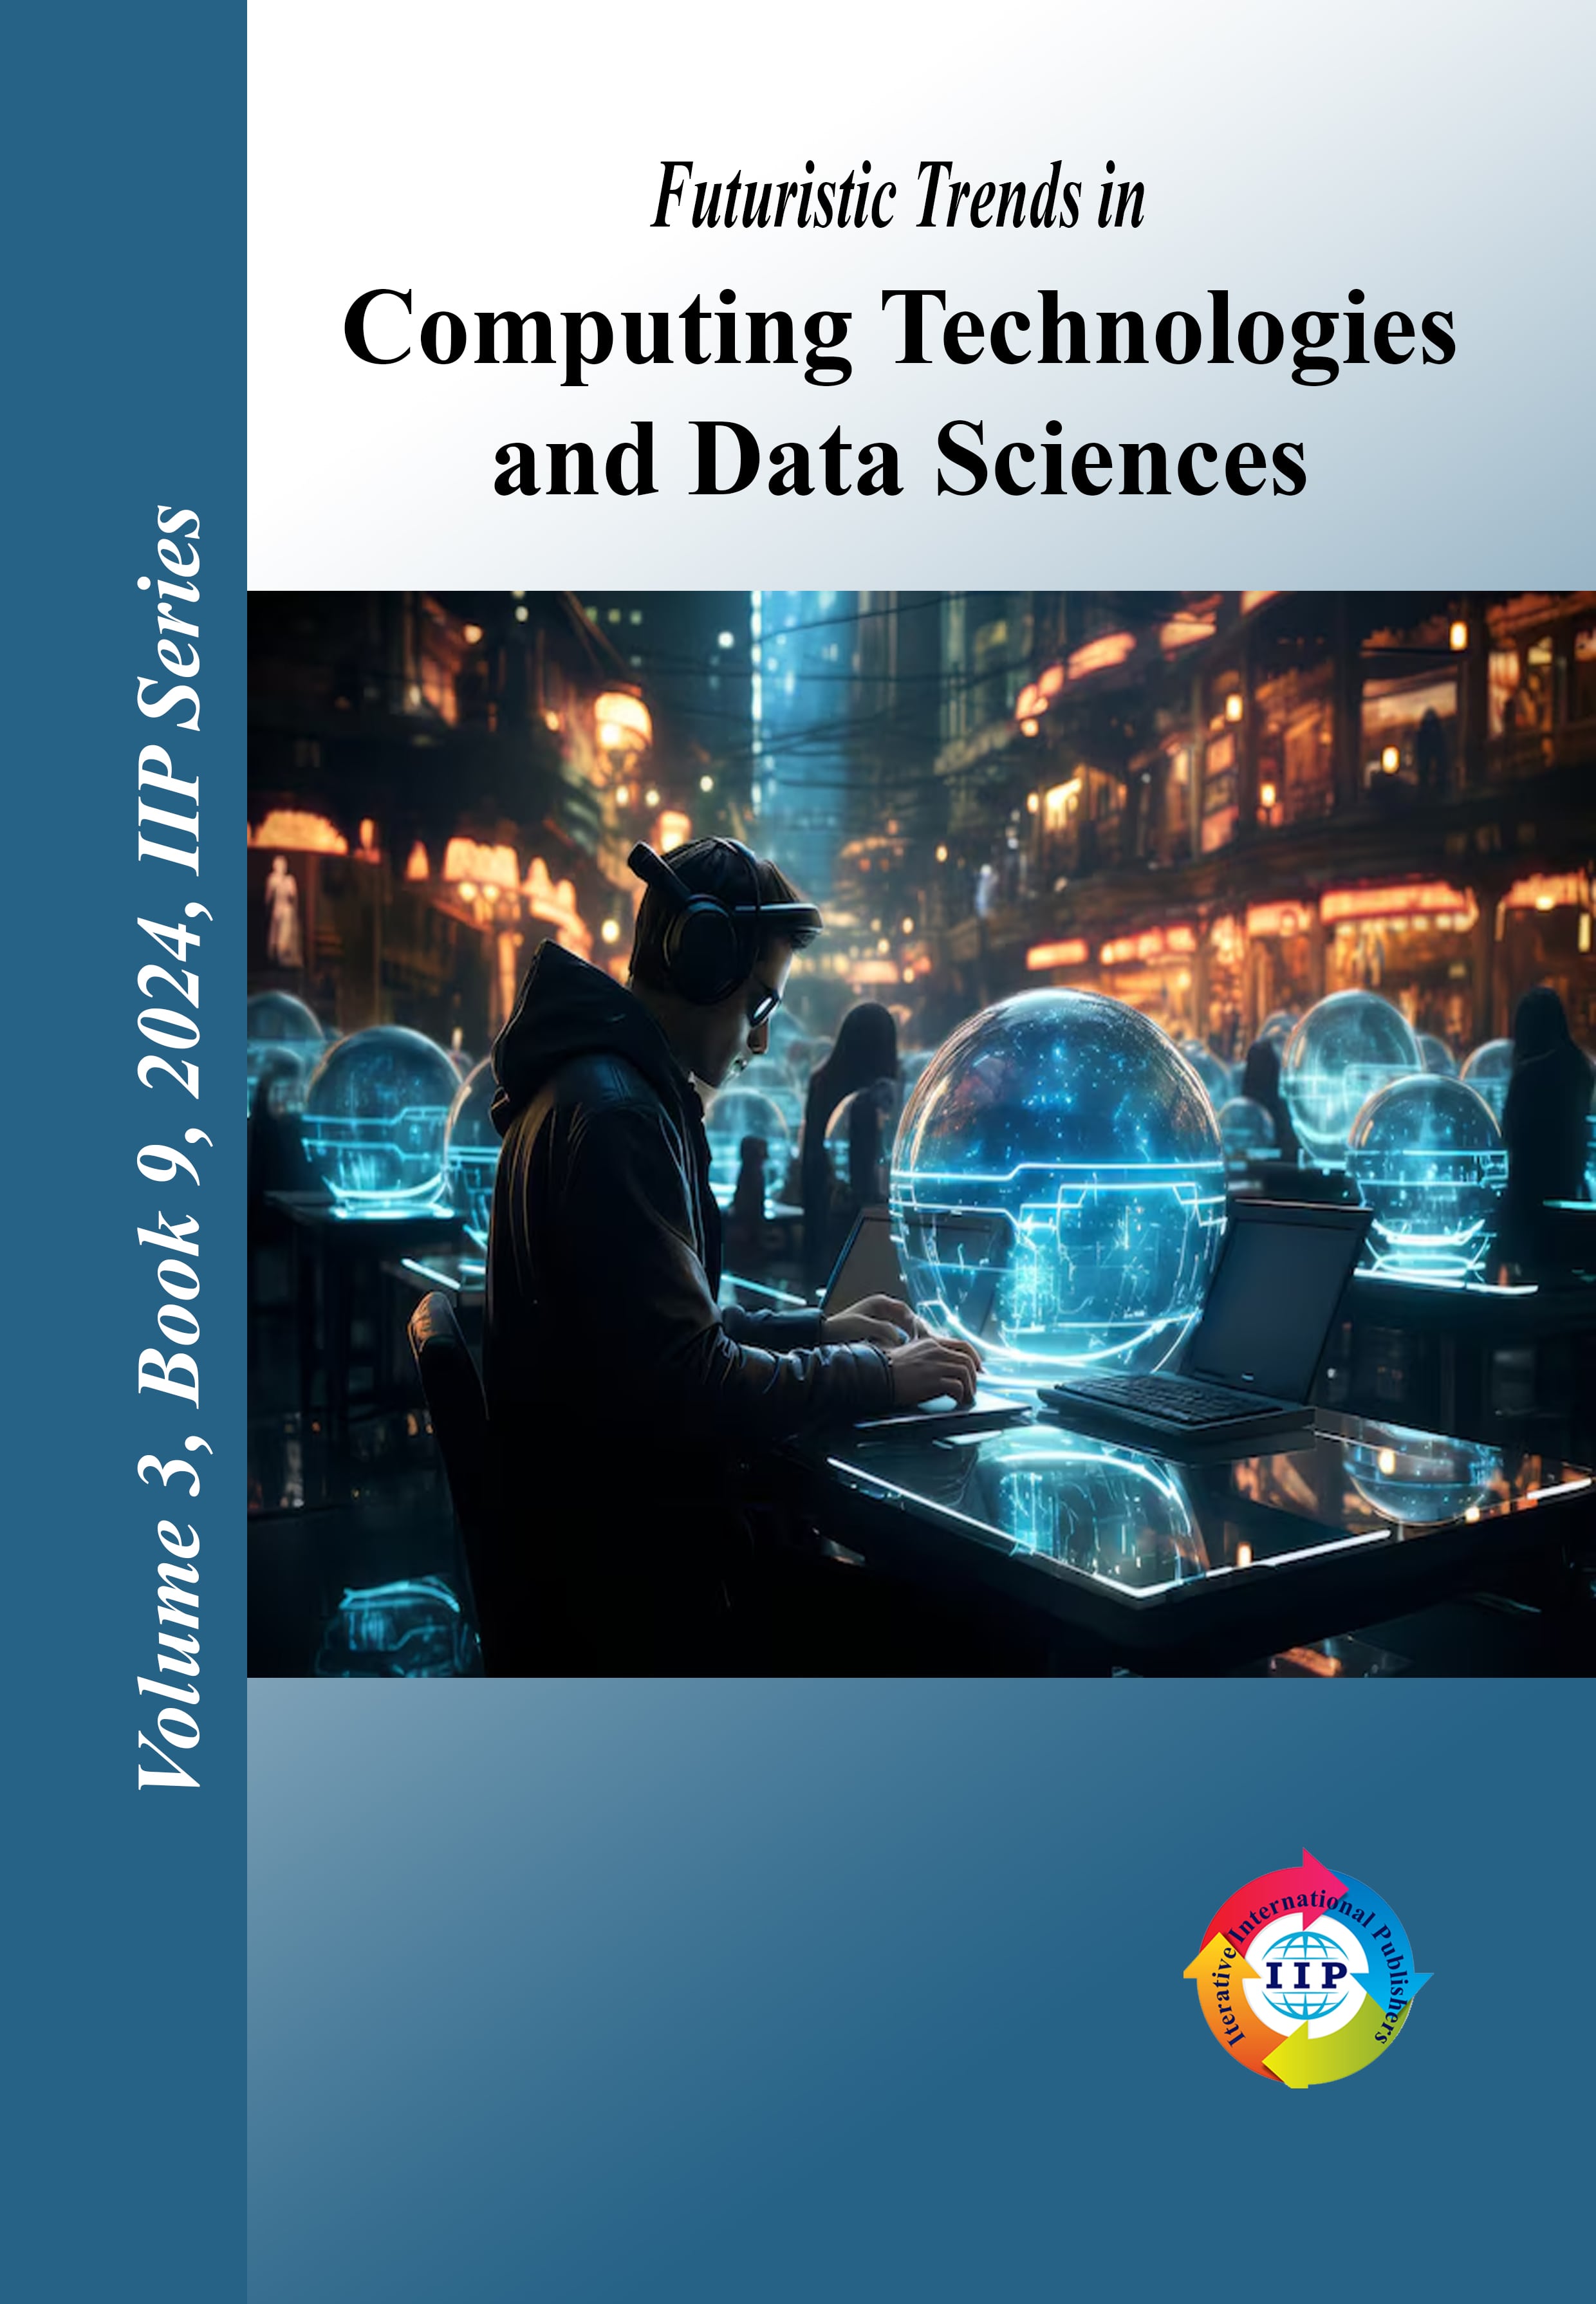 Futuristic Trends in Computing Technologies and Data Sciences Volume 3 Book 9